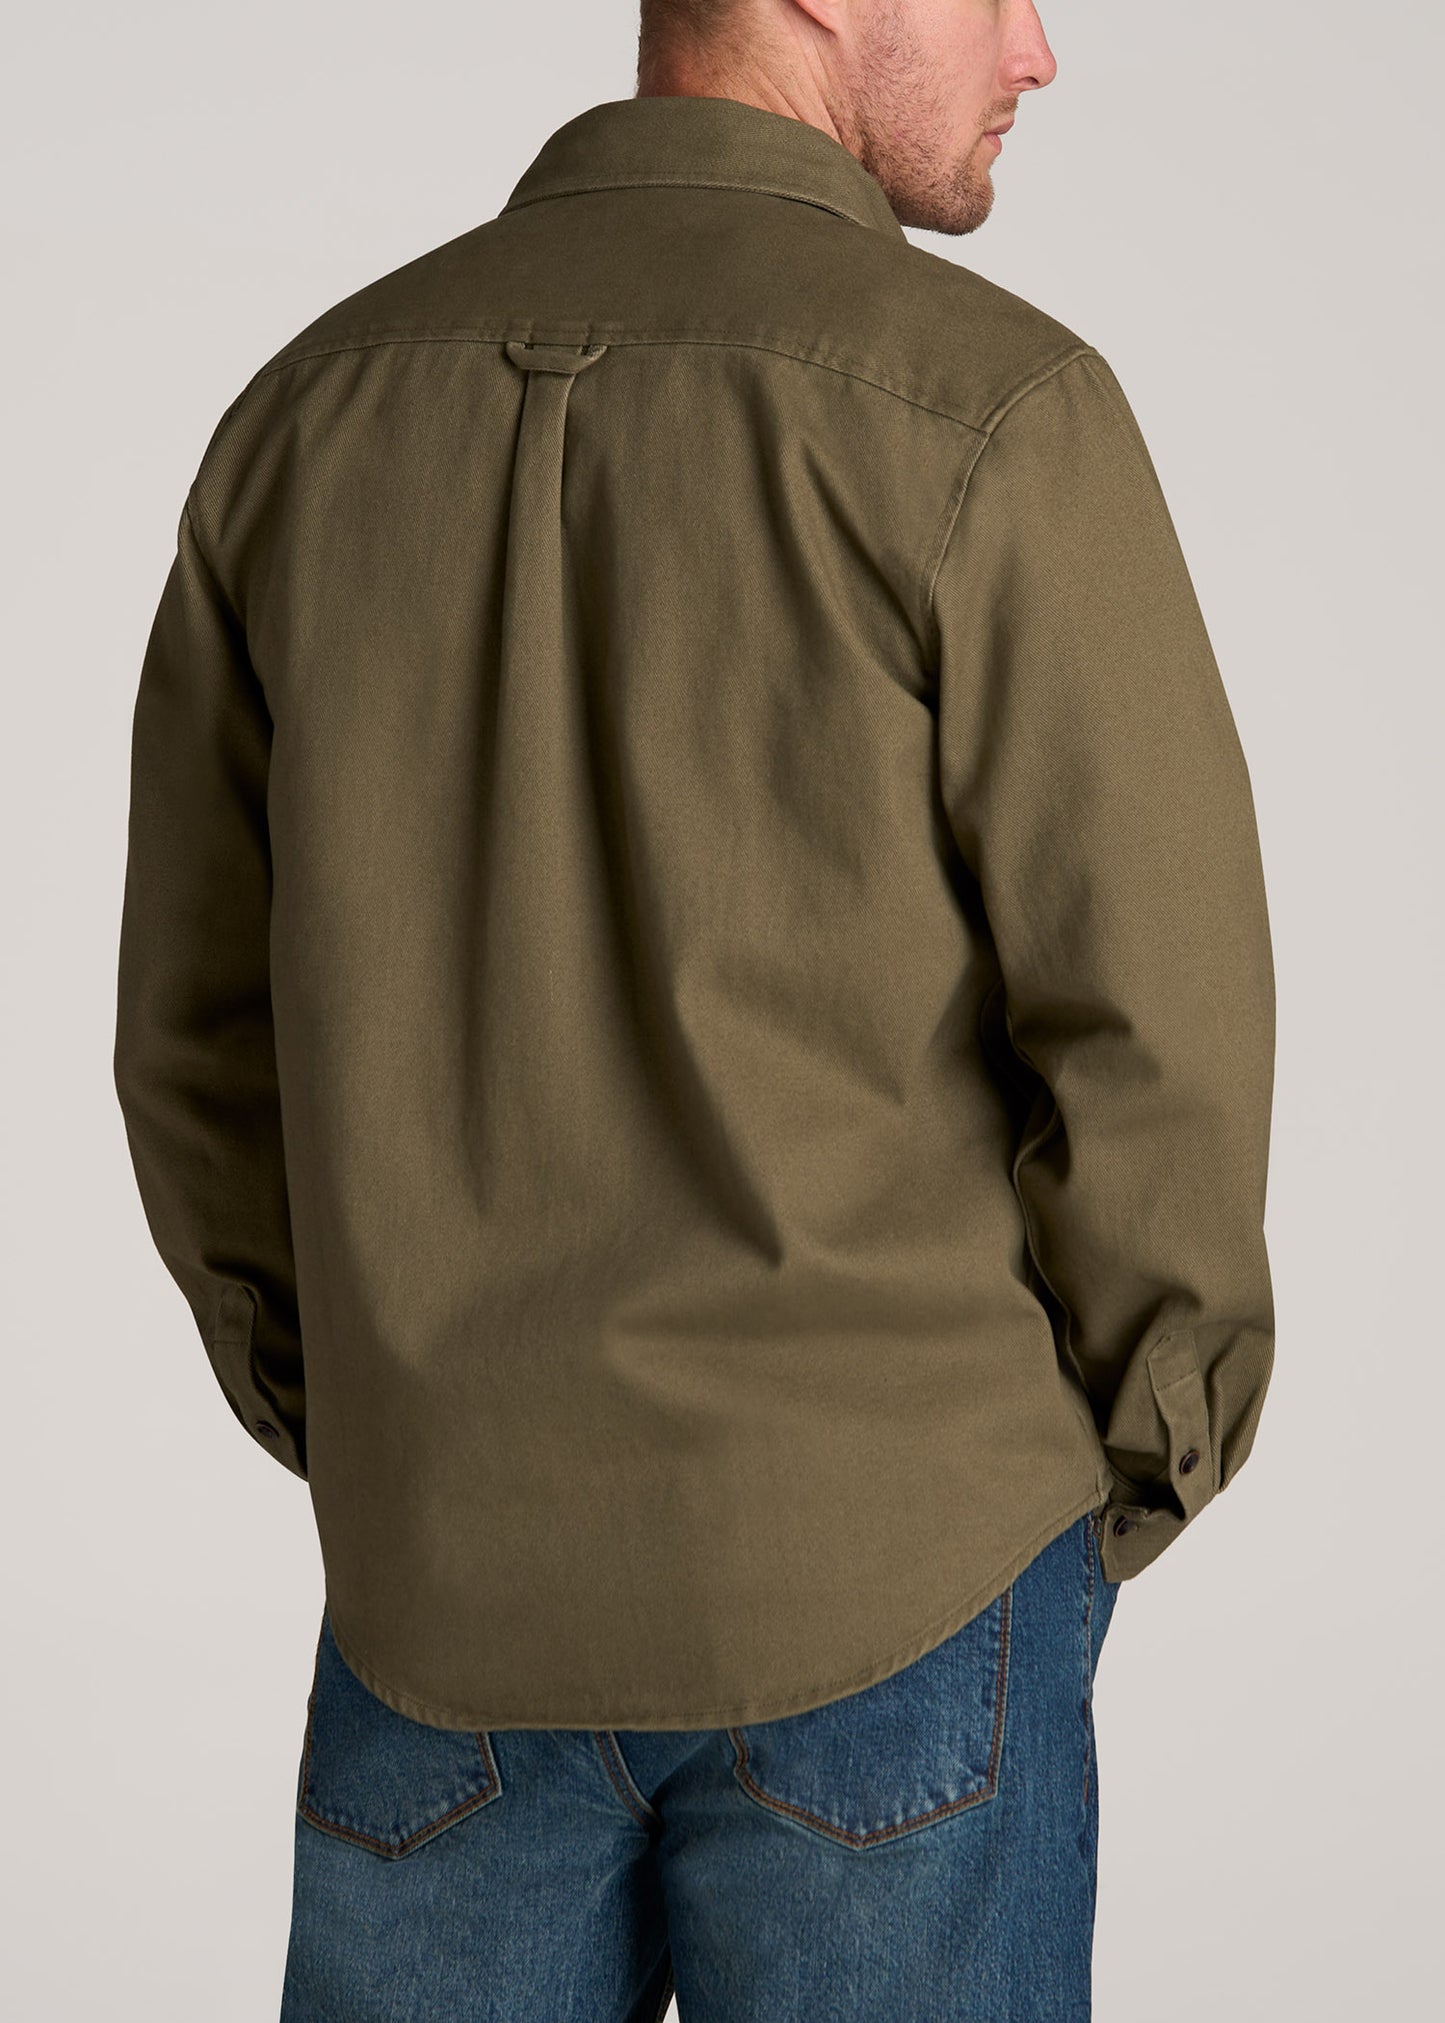 LJ&S Heavyweight Cotton Twill Overshirt for Tall Men in Vintage Moss Green